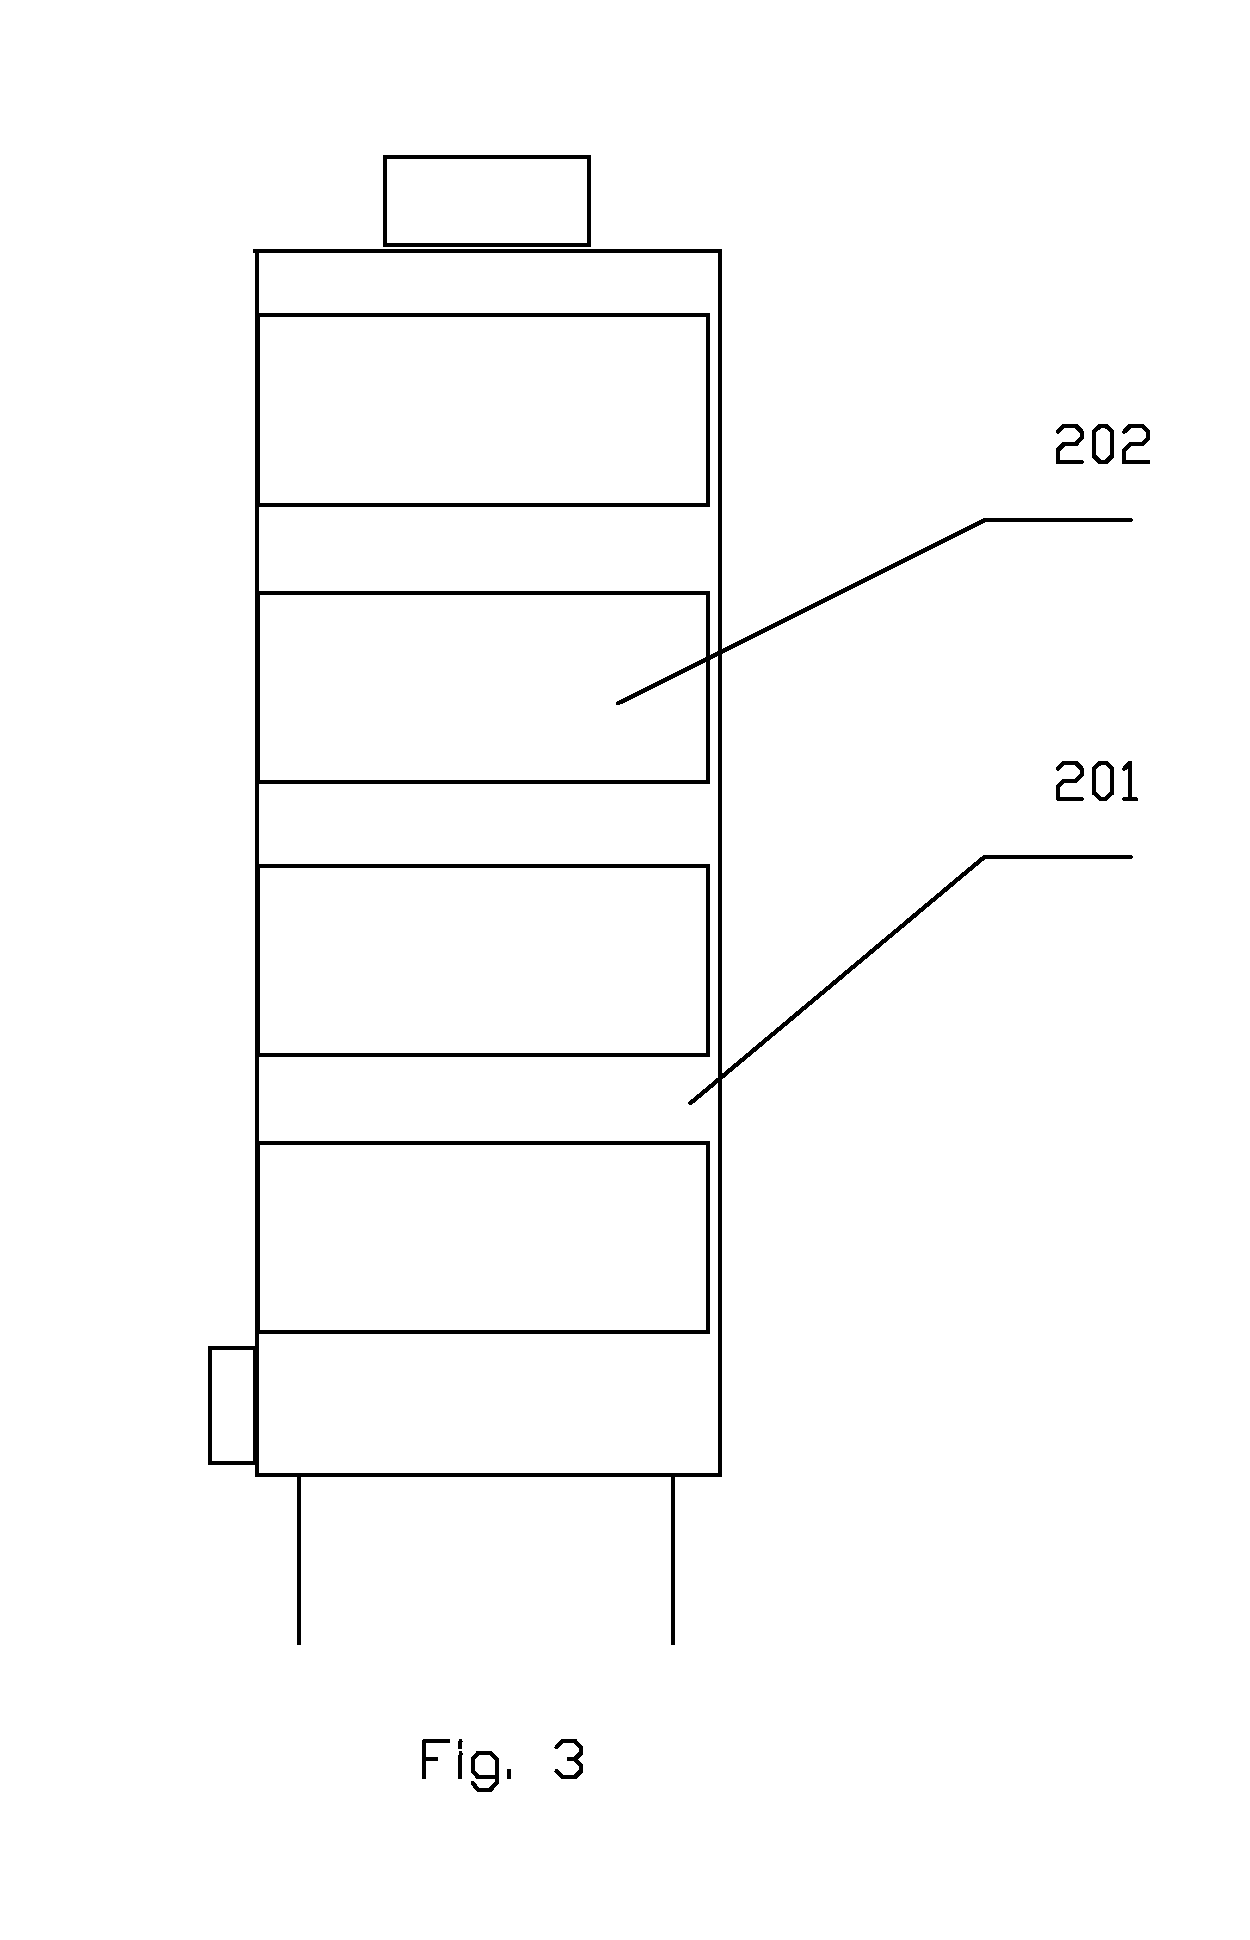 Purification device for flue gases